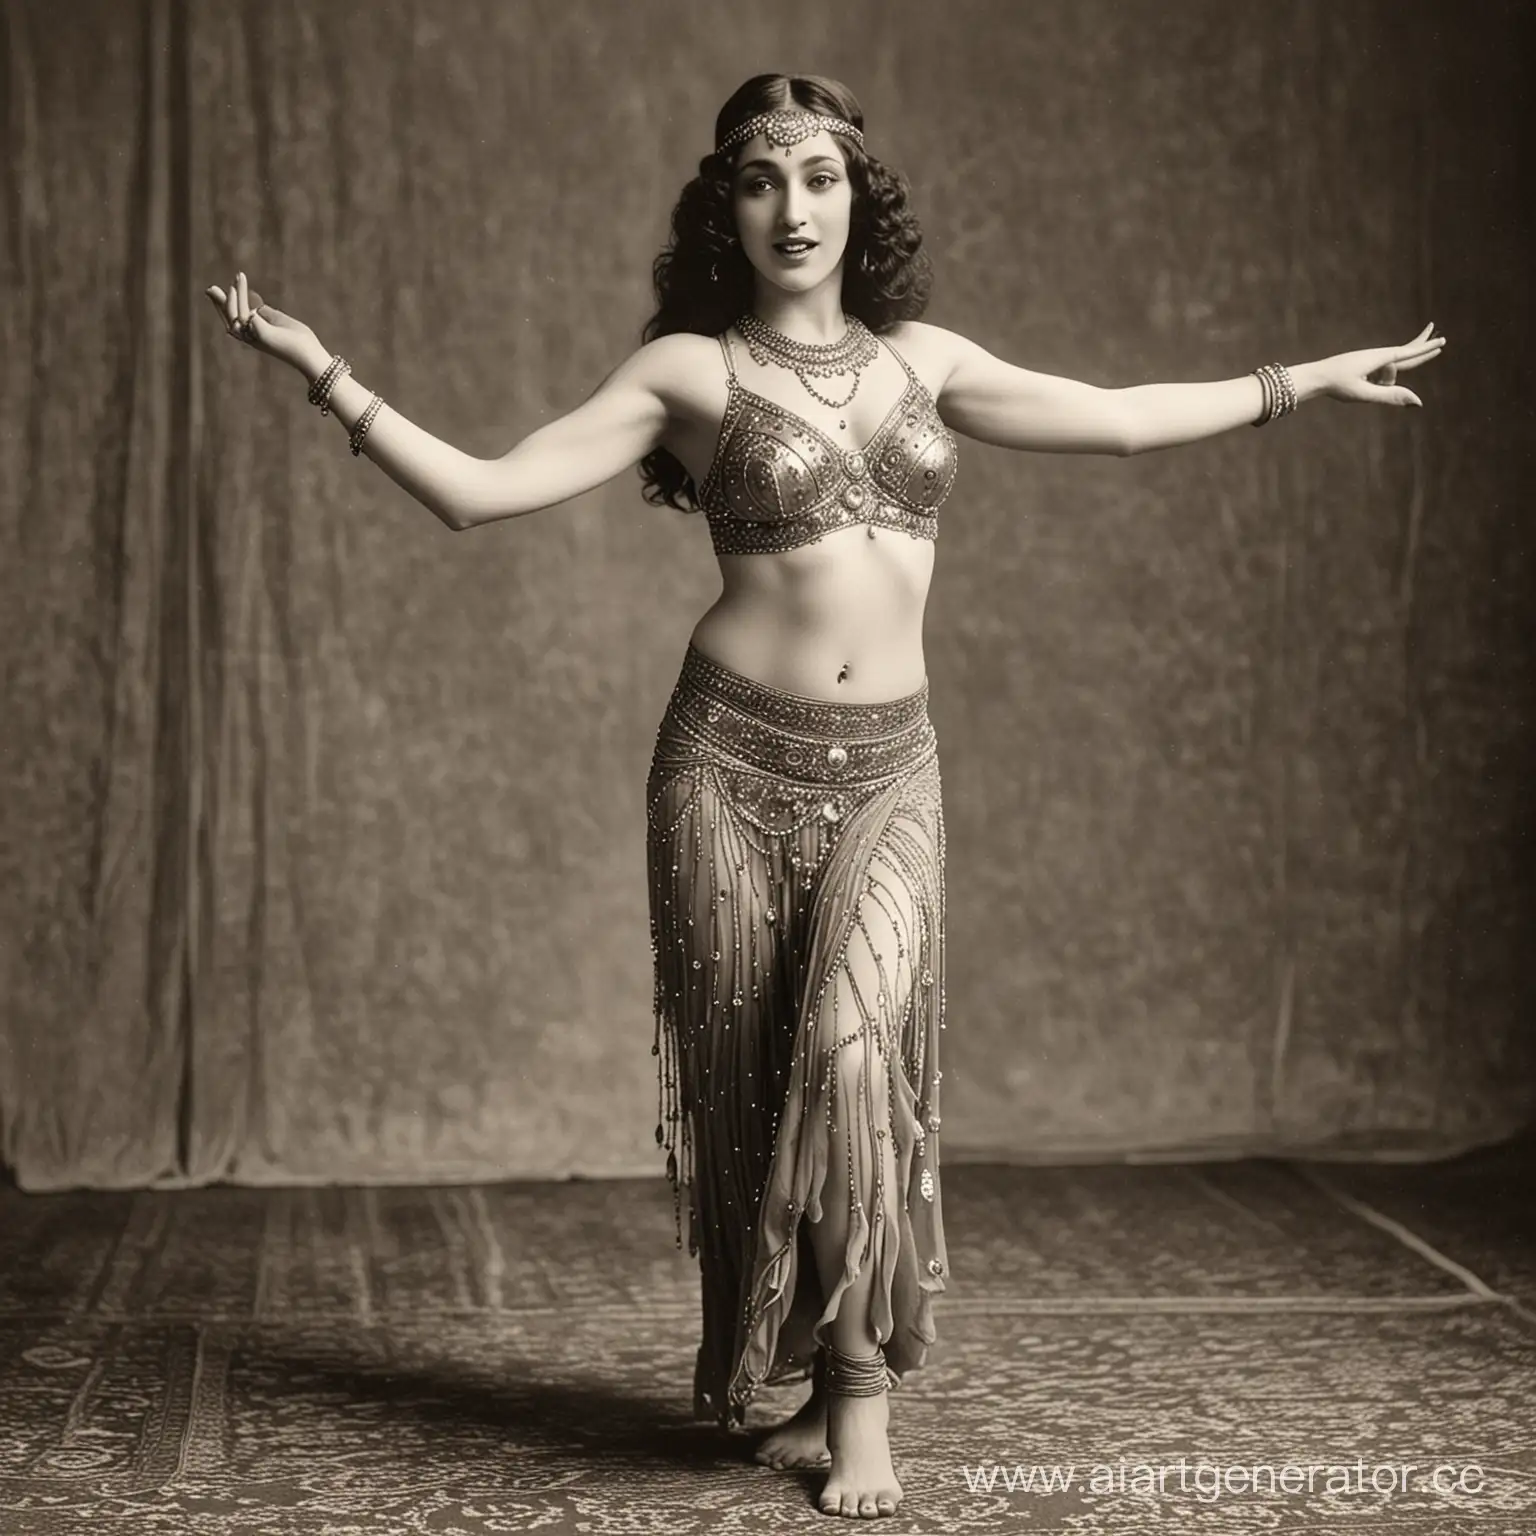 1920s-Girl-Belly-Dancing-Performance